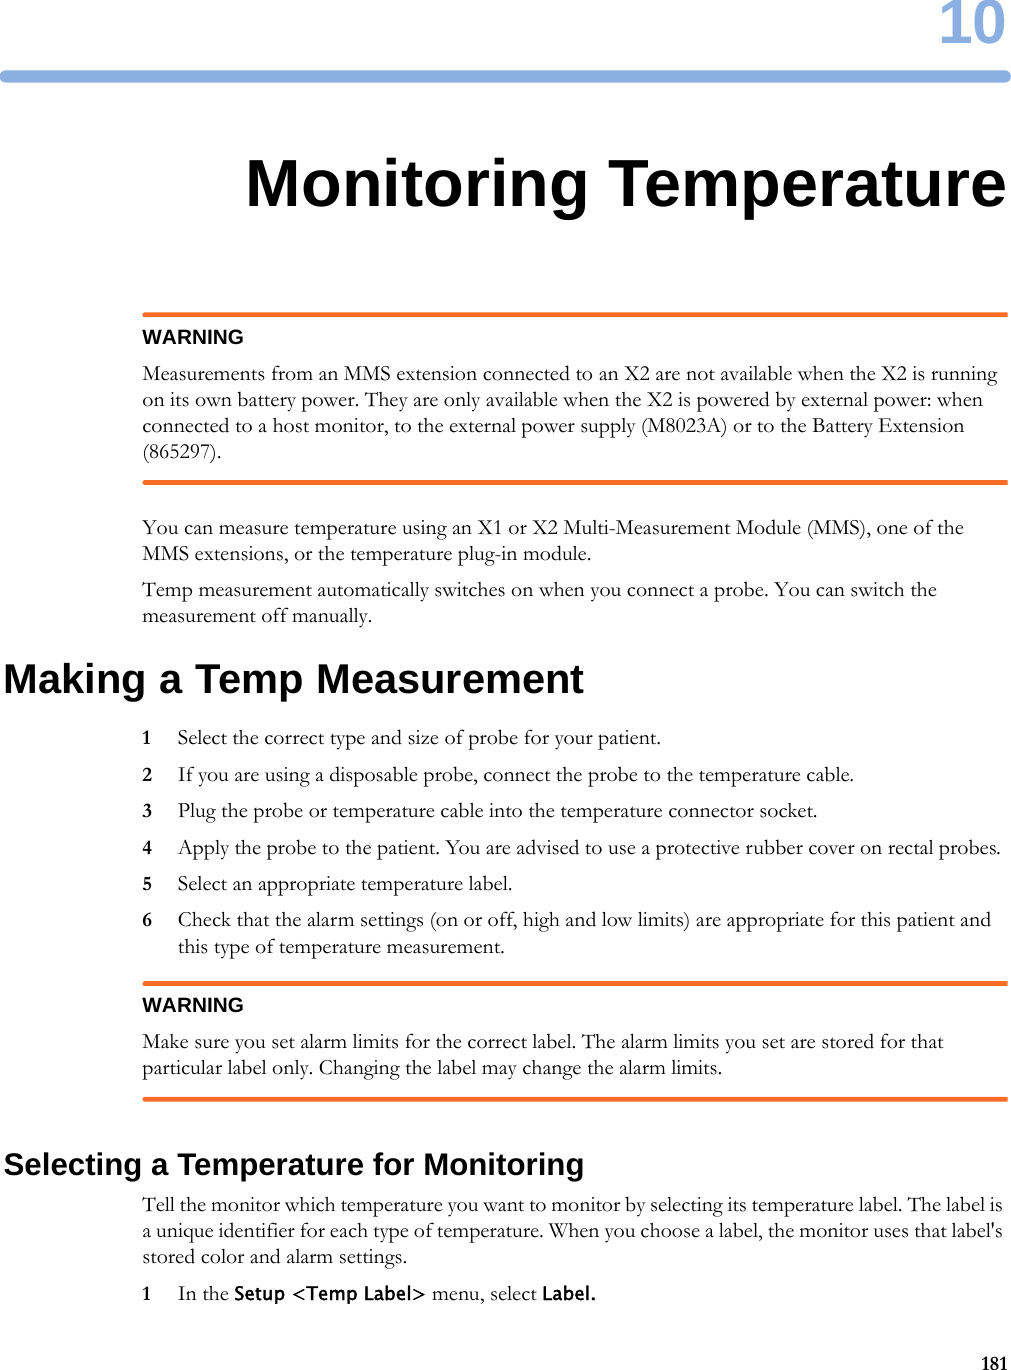 1018110Monitoring TemperatureWARNINGMeasurements from an MMS extension connected to an X2 are not available when the X2 is running on its own battery power. They are only available when the X2 is powered by external power: when connected to a host monitor, to the external power supply (M8023A) or to the Battery Extension (865297).You can measure temperature using an X1 or X2 Multi-Measurement Module (MMS), one of the MMS extensions, or the temperature plug-in module.Temp measurement automatically switches on when you connect a probe. You can switch the measurement off manually.Making a Temp Measurement1Select the correct type and size of probe for your patient.2If you are using a disposable probe, connect the probe to the temperature cable.3Plug the probe or temperature cable into the temperature connector socket.4Apply the probe to the patient. You are advised to use a protective rubber cover on rectal probes.5Select an appropriate temperature label.6Check that the alarm settings (on or off, high and low limits) are appropriate for this patient and this type of temperature measurement.WARNINGMake sure you set alarm limits for the correct label. The alarm limits you set are stored for that particular label only. Changing the label may change the alarm limits.Selecting a Temperature for MonitoringTell the monitor which temperature you want to monitor by selecting its temperature label. The label is a unique identifier for each type of temperature. When you choose a label, the monitor uses that label&apos;s stored color and alarm settings.1In the Setup &lt;Temp Label&gt; menu, select Label.